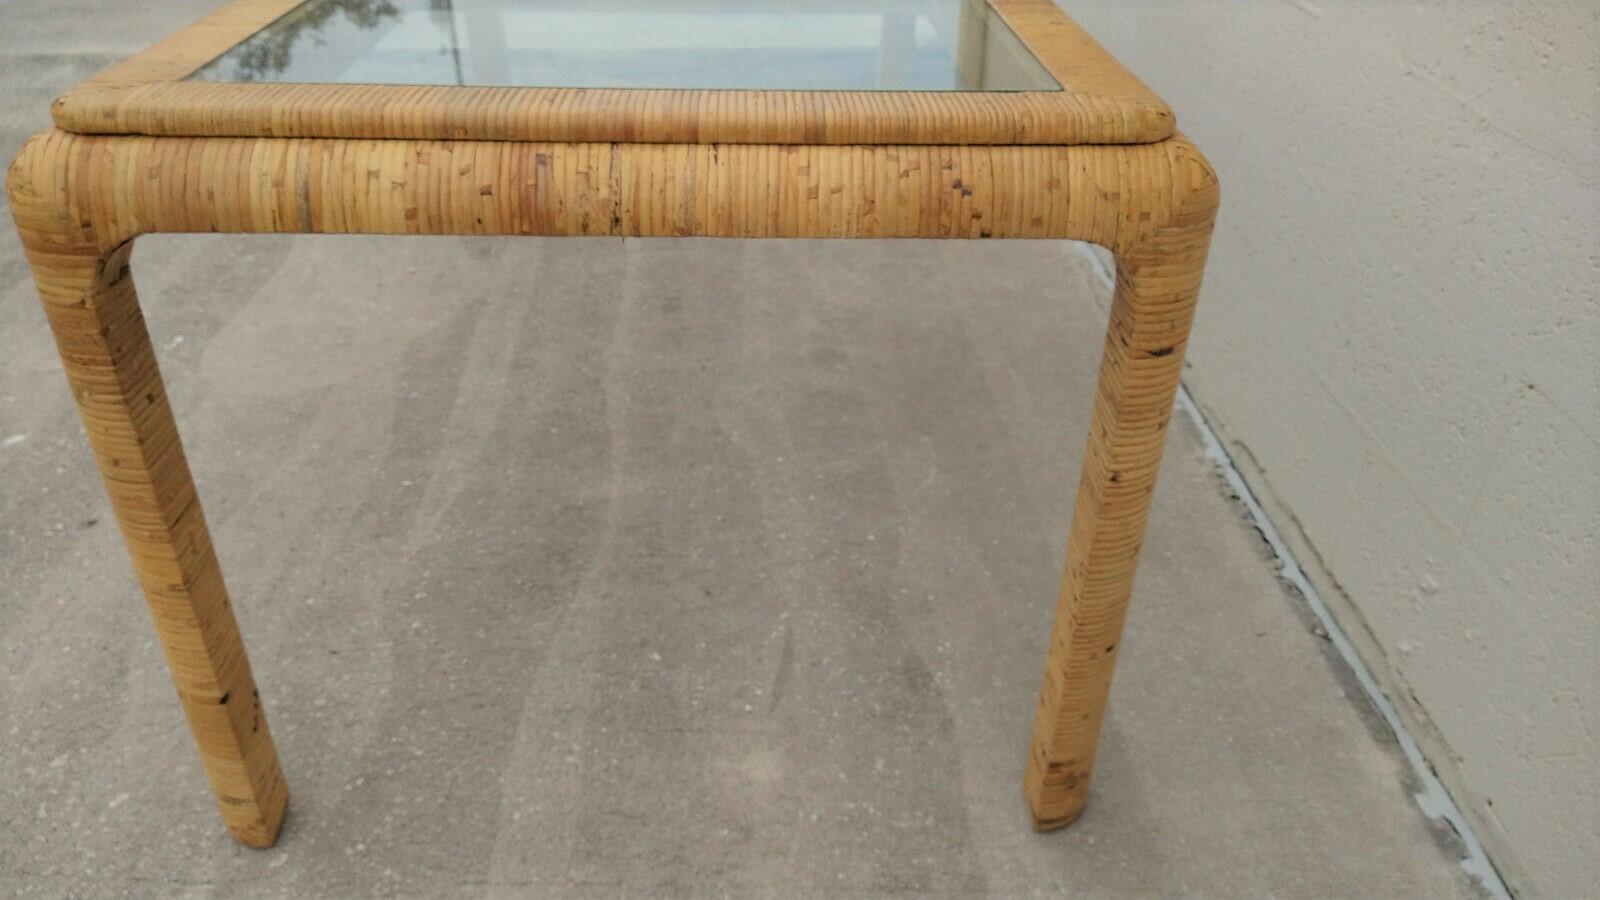 Woven Rattan Wrapped Waterfall Dining Table with Extension Leaf, Seats 6 to 8 For Sale